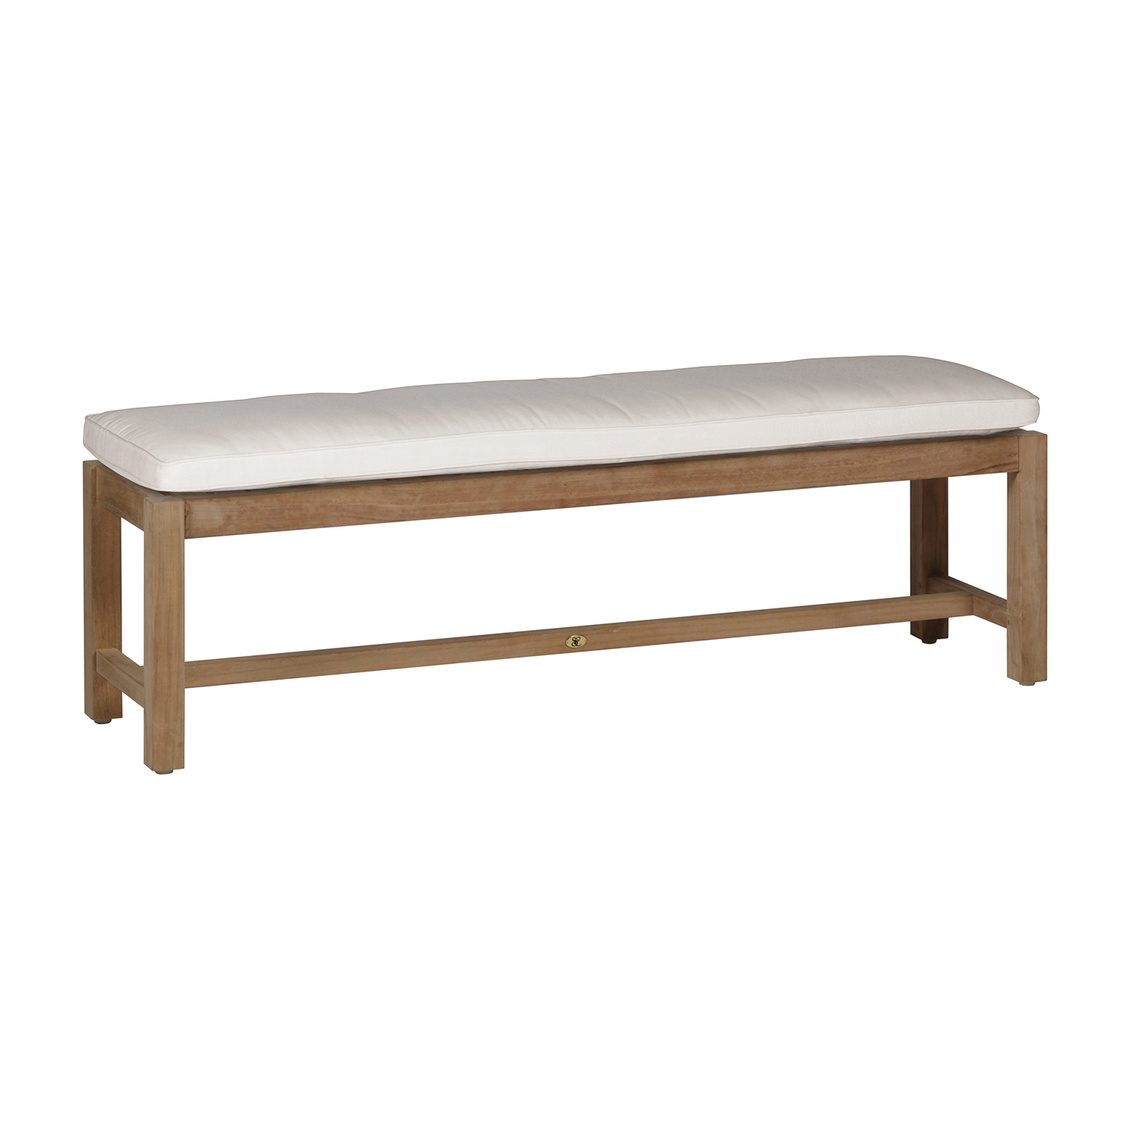 club teak backless bench in natural teak – frame only product image